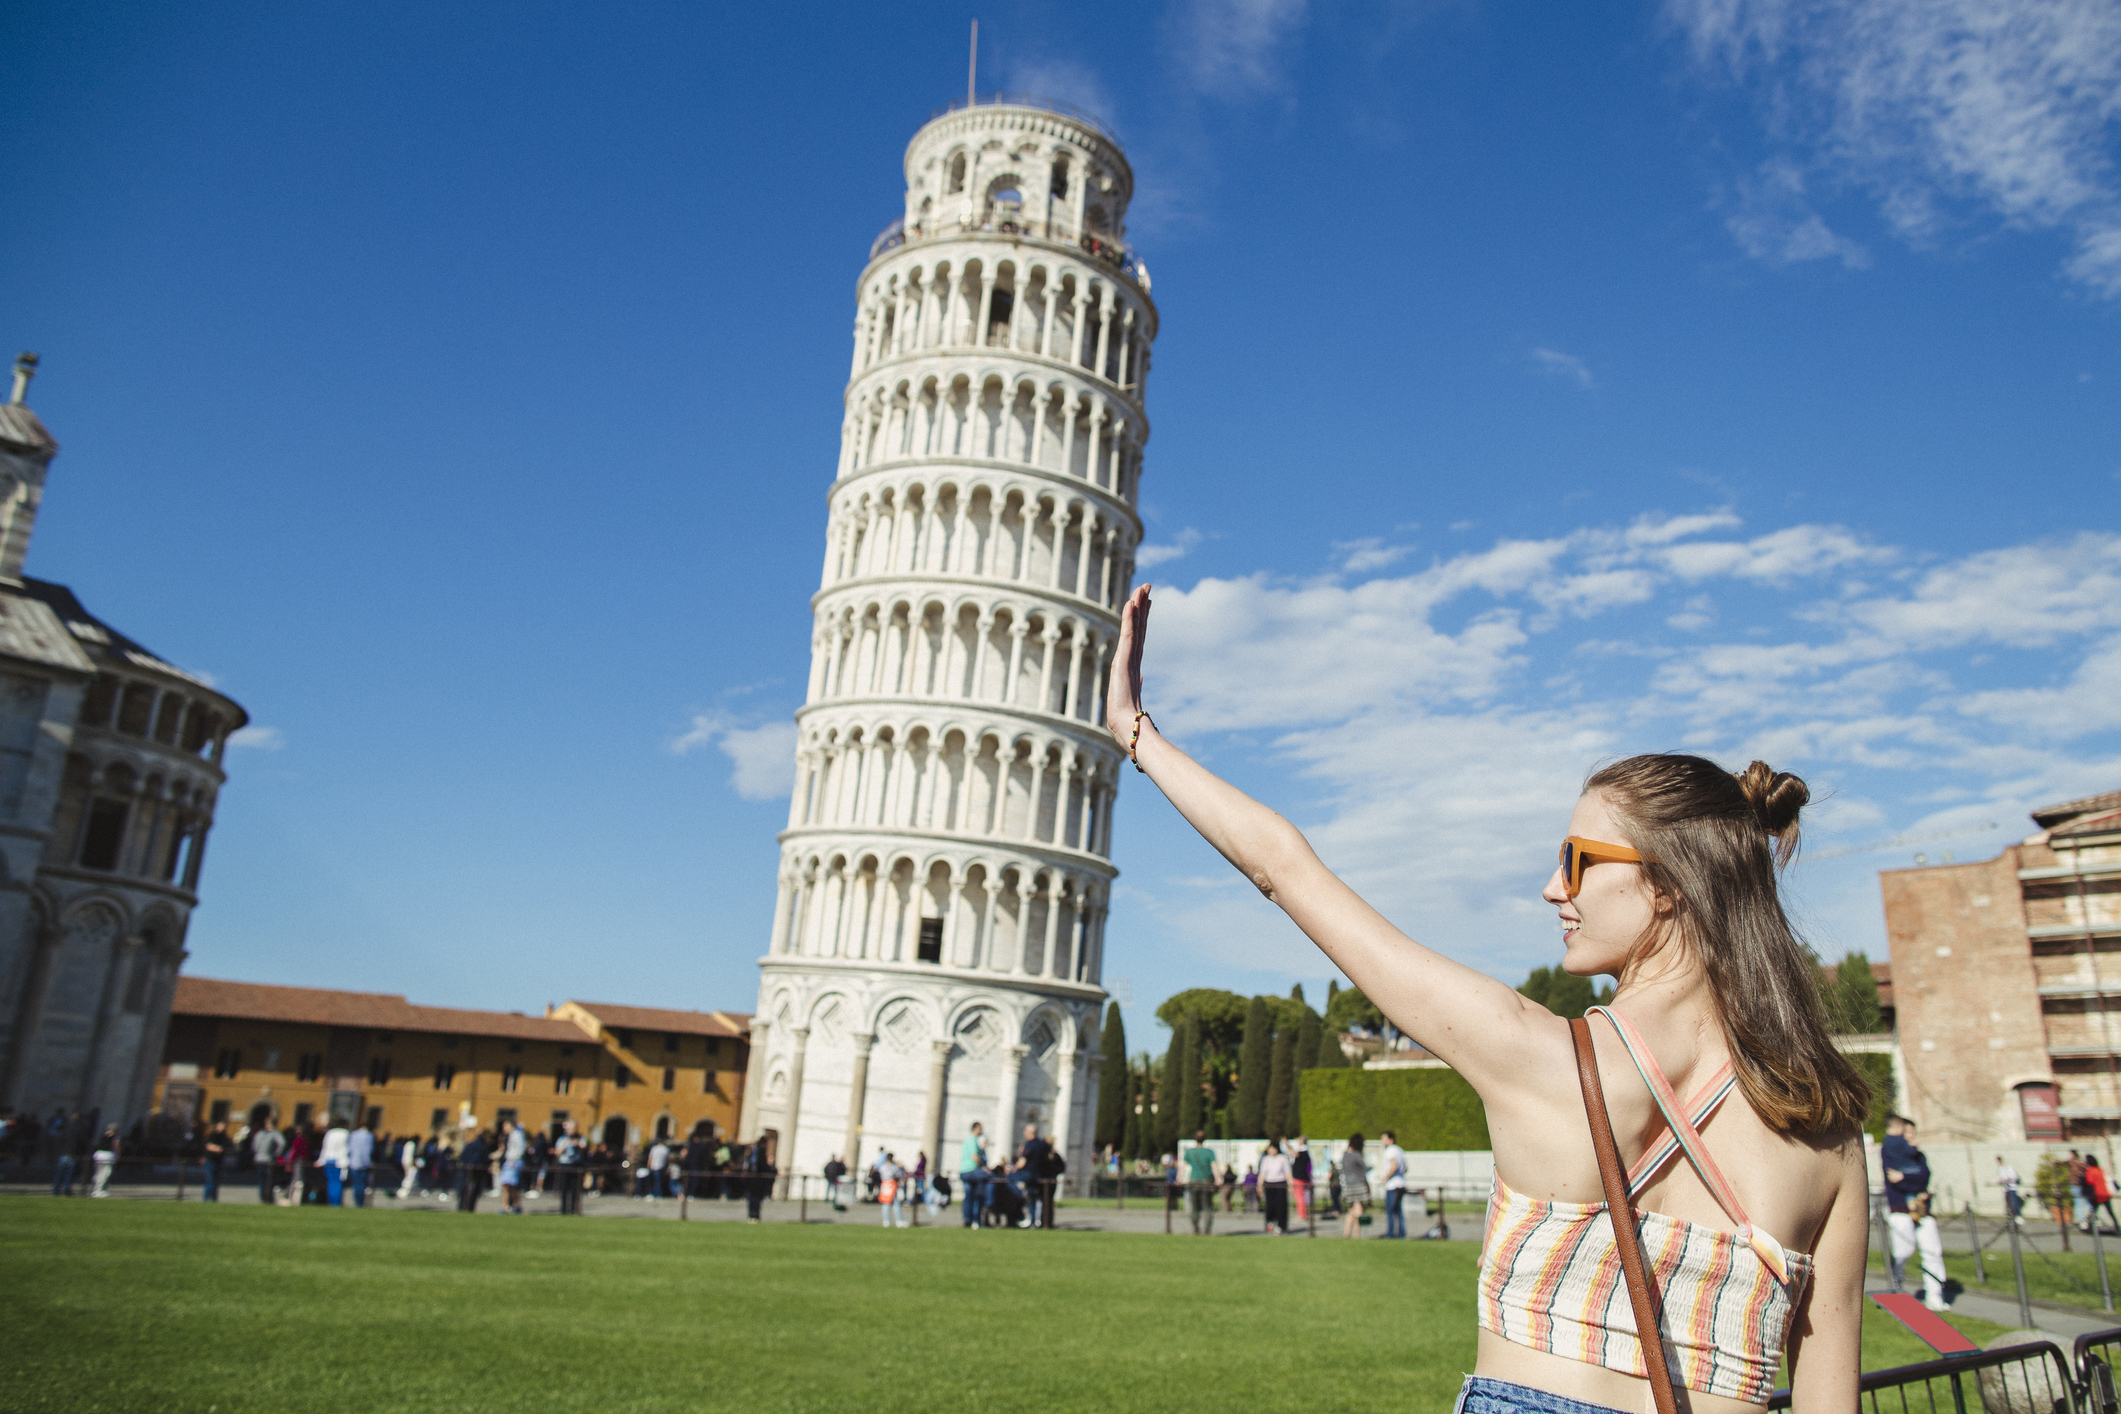 A tourist taking a photo of the Leaning Tower of Pisa